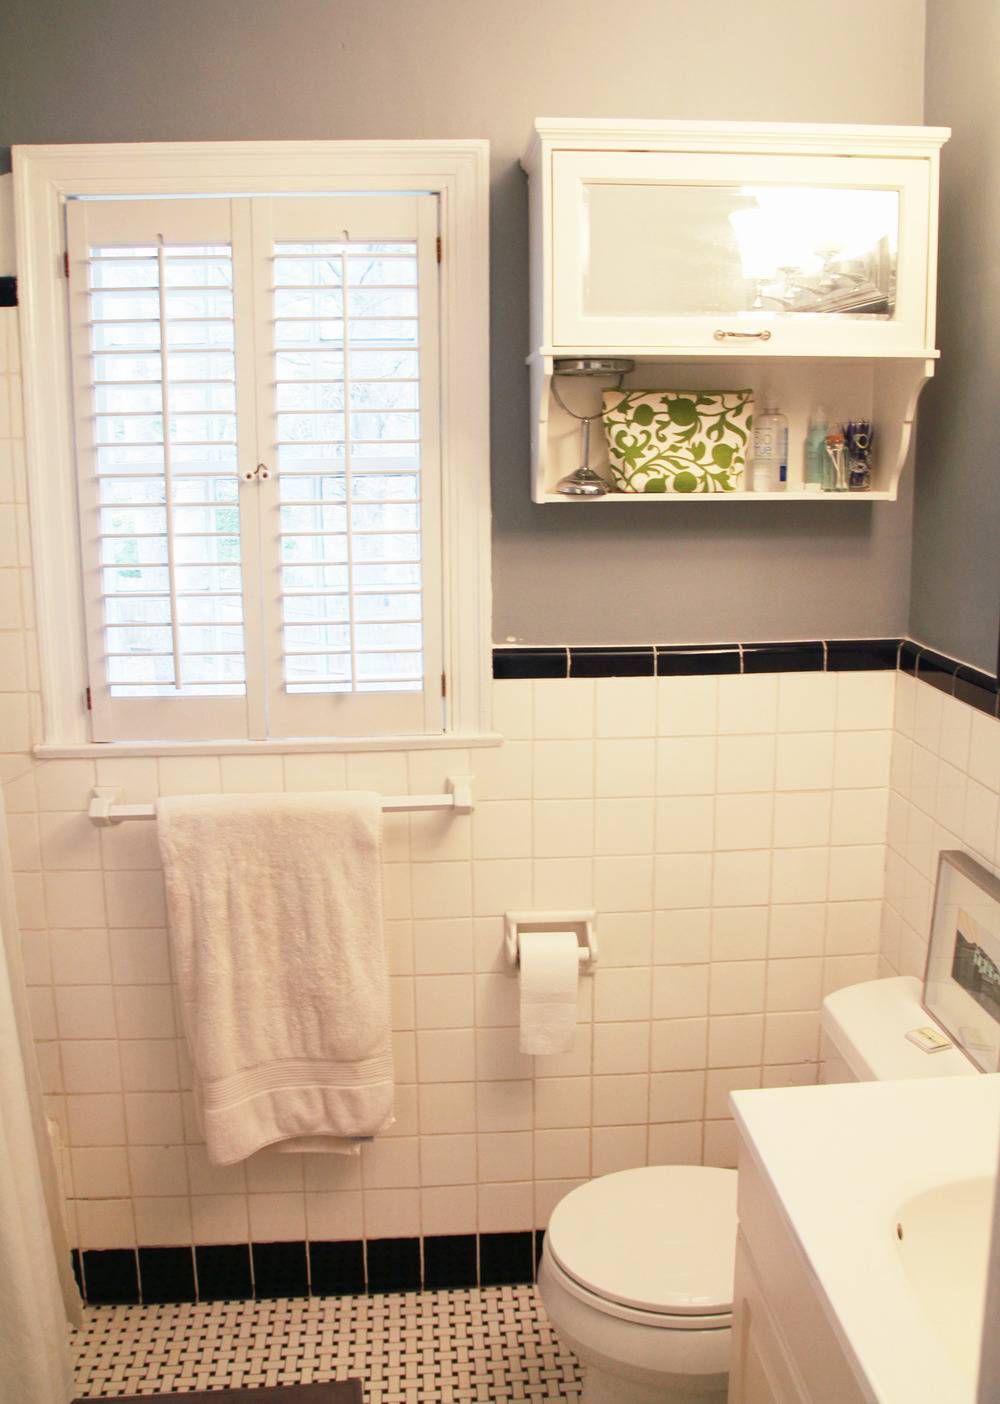 Light shines through a slatted shuttered window in a bathroom with gray walls.